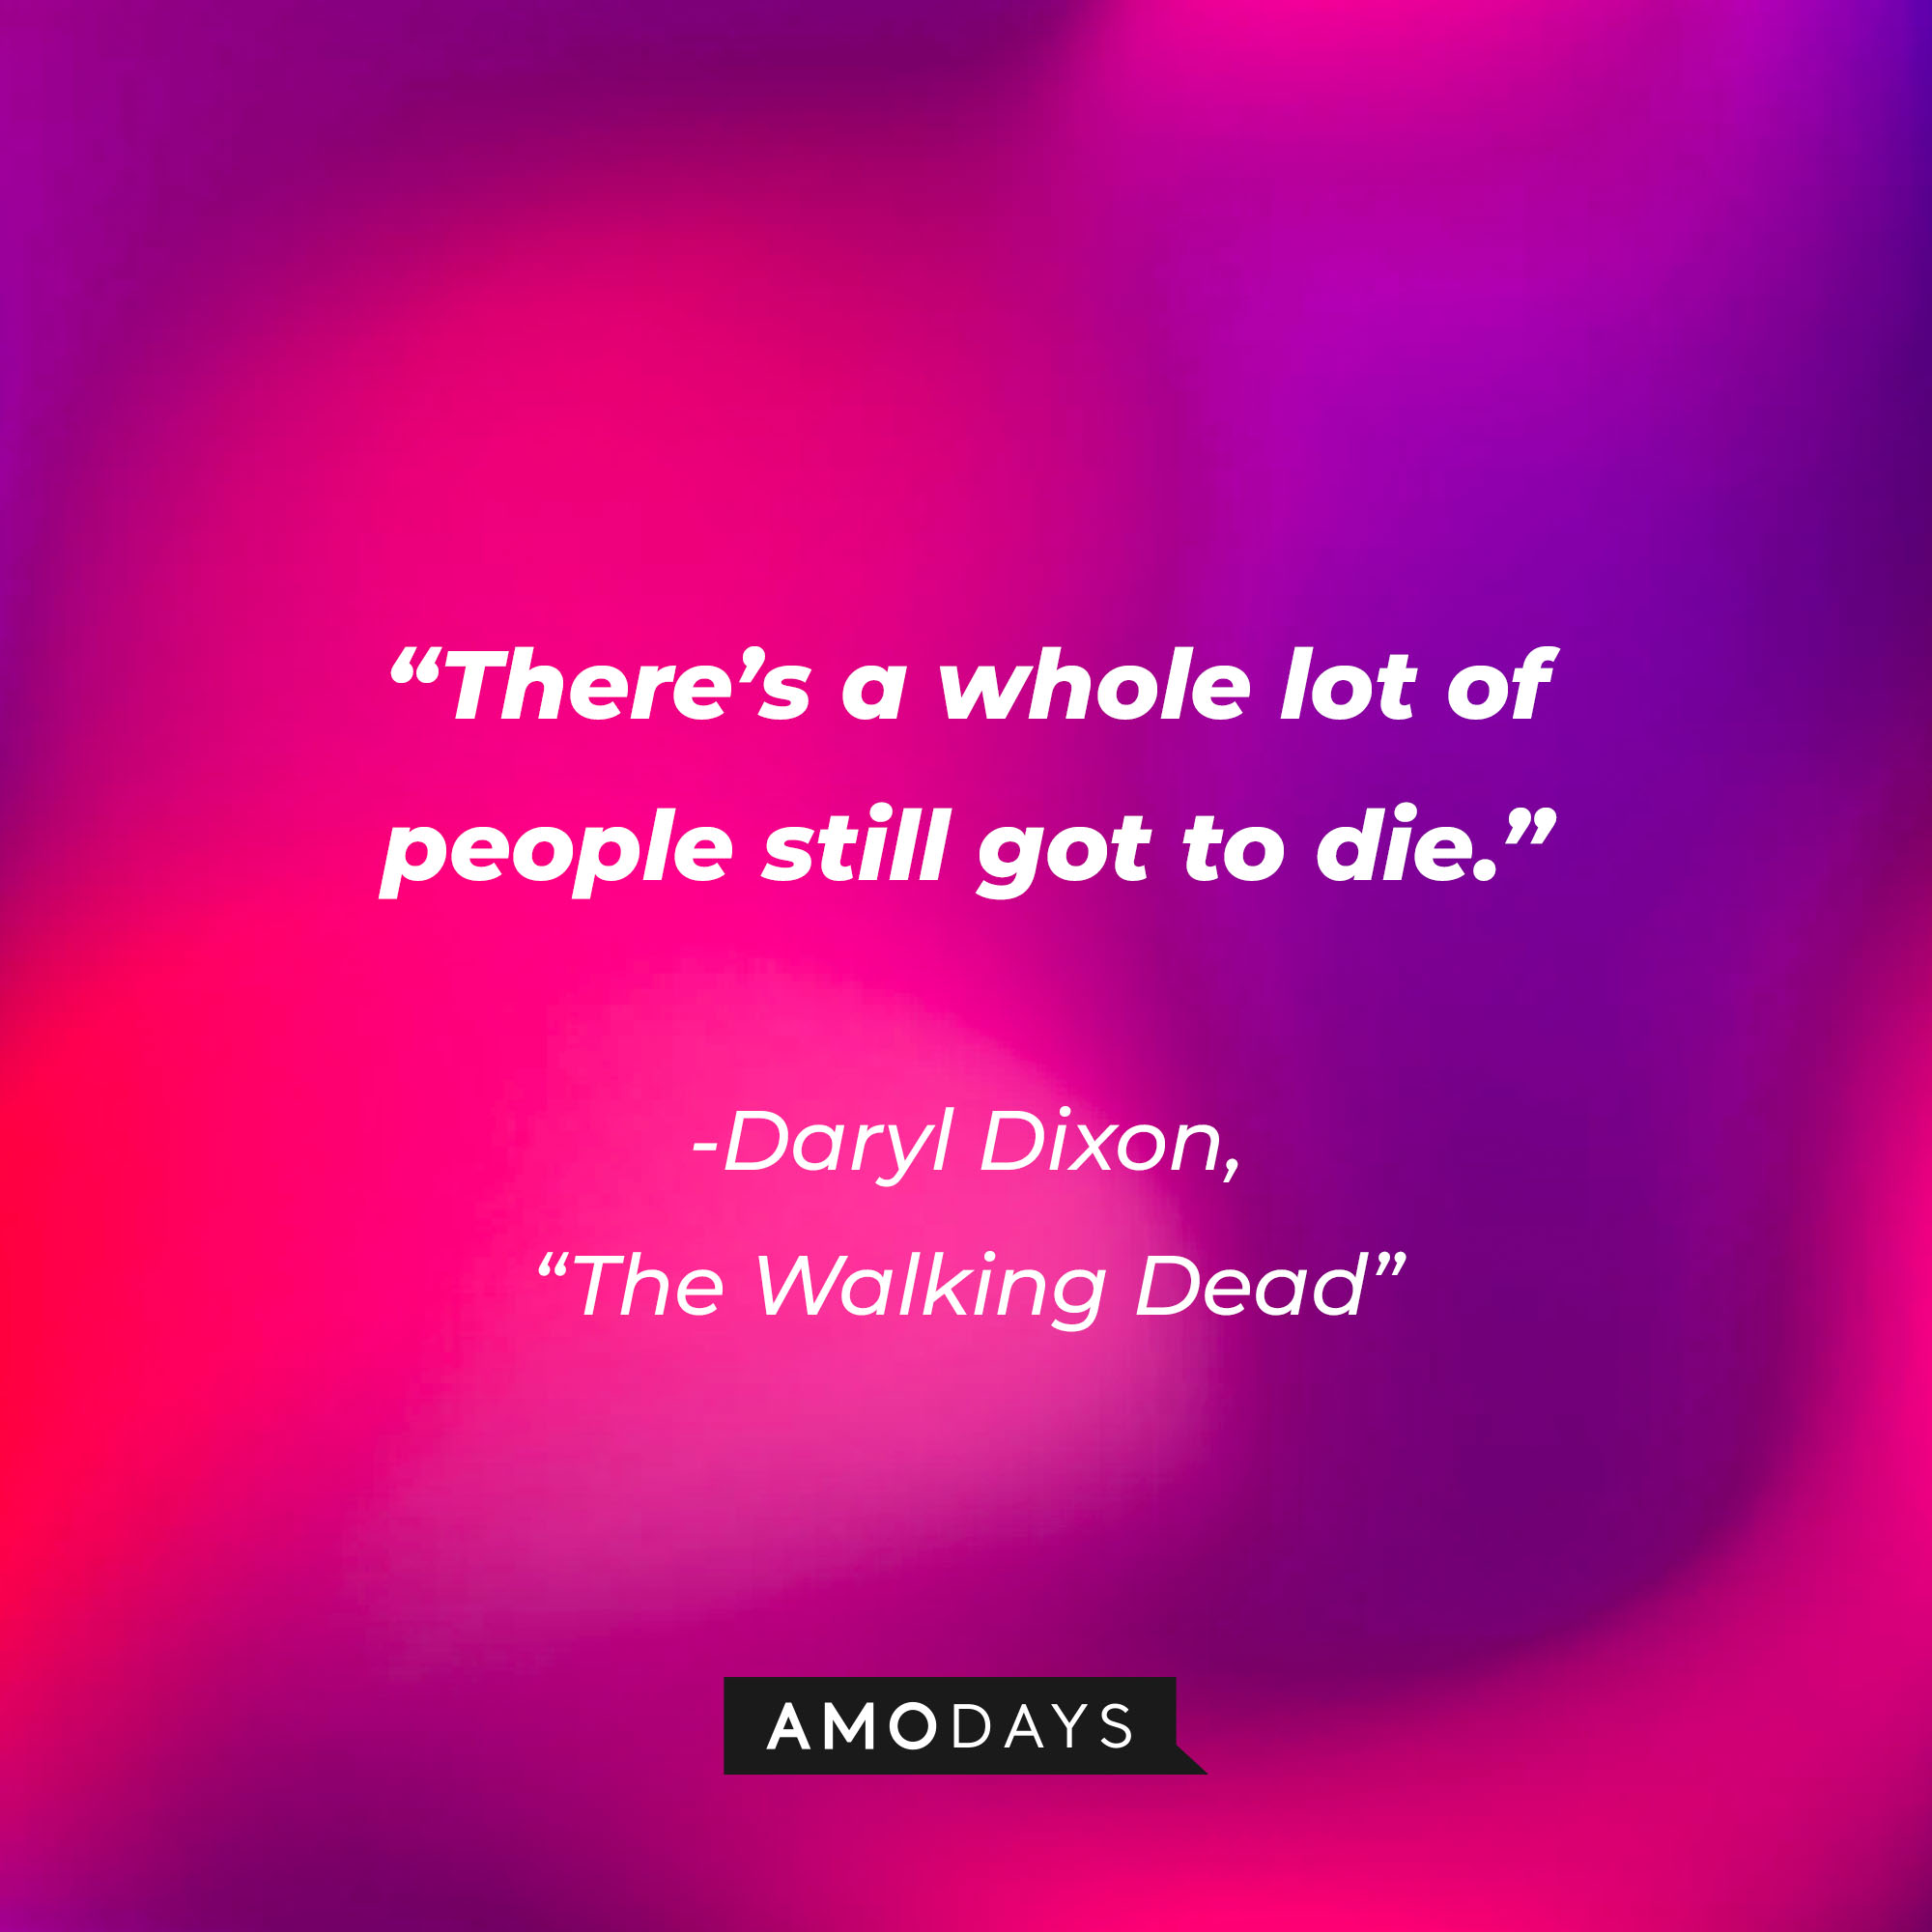 Daryl Dixon’s quote from “The Walking Dead”: “There’s a whole lot of people still got to die.” | Source: AmoDays